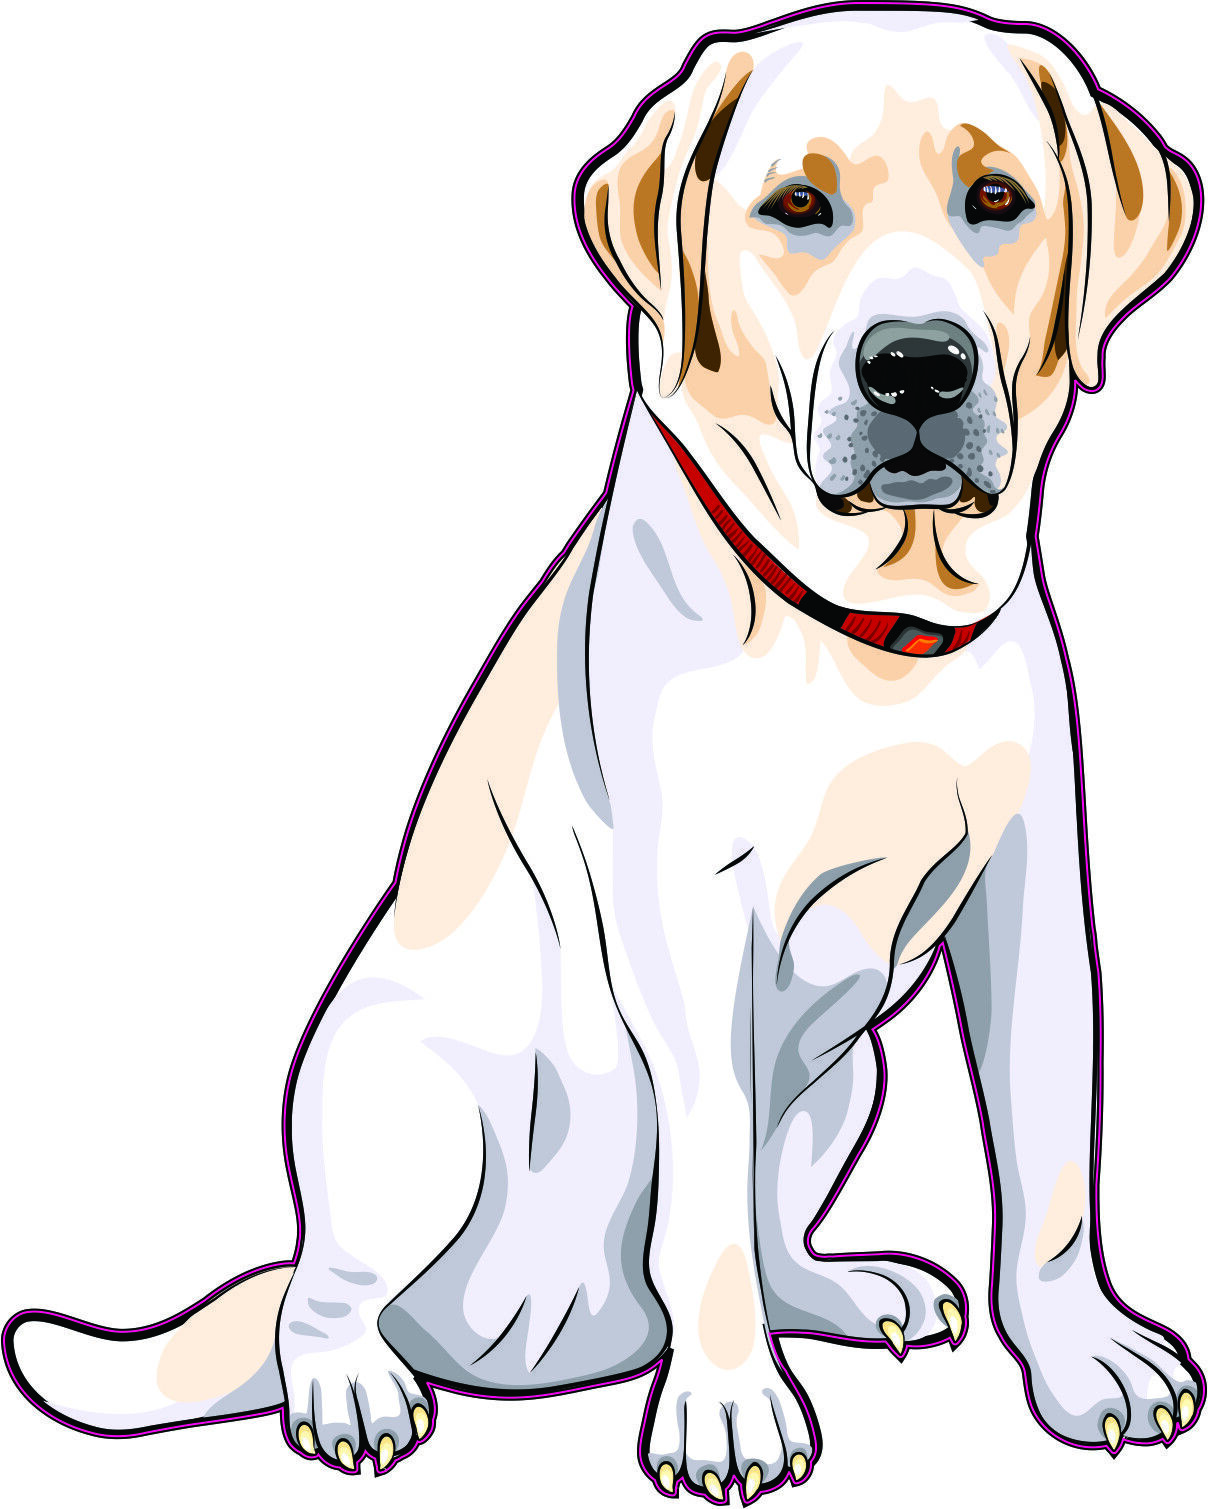 4in x 5in Right Facing Yellow Labrador Vinyl Sticker Car Vehicle Bumper Decal